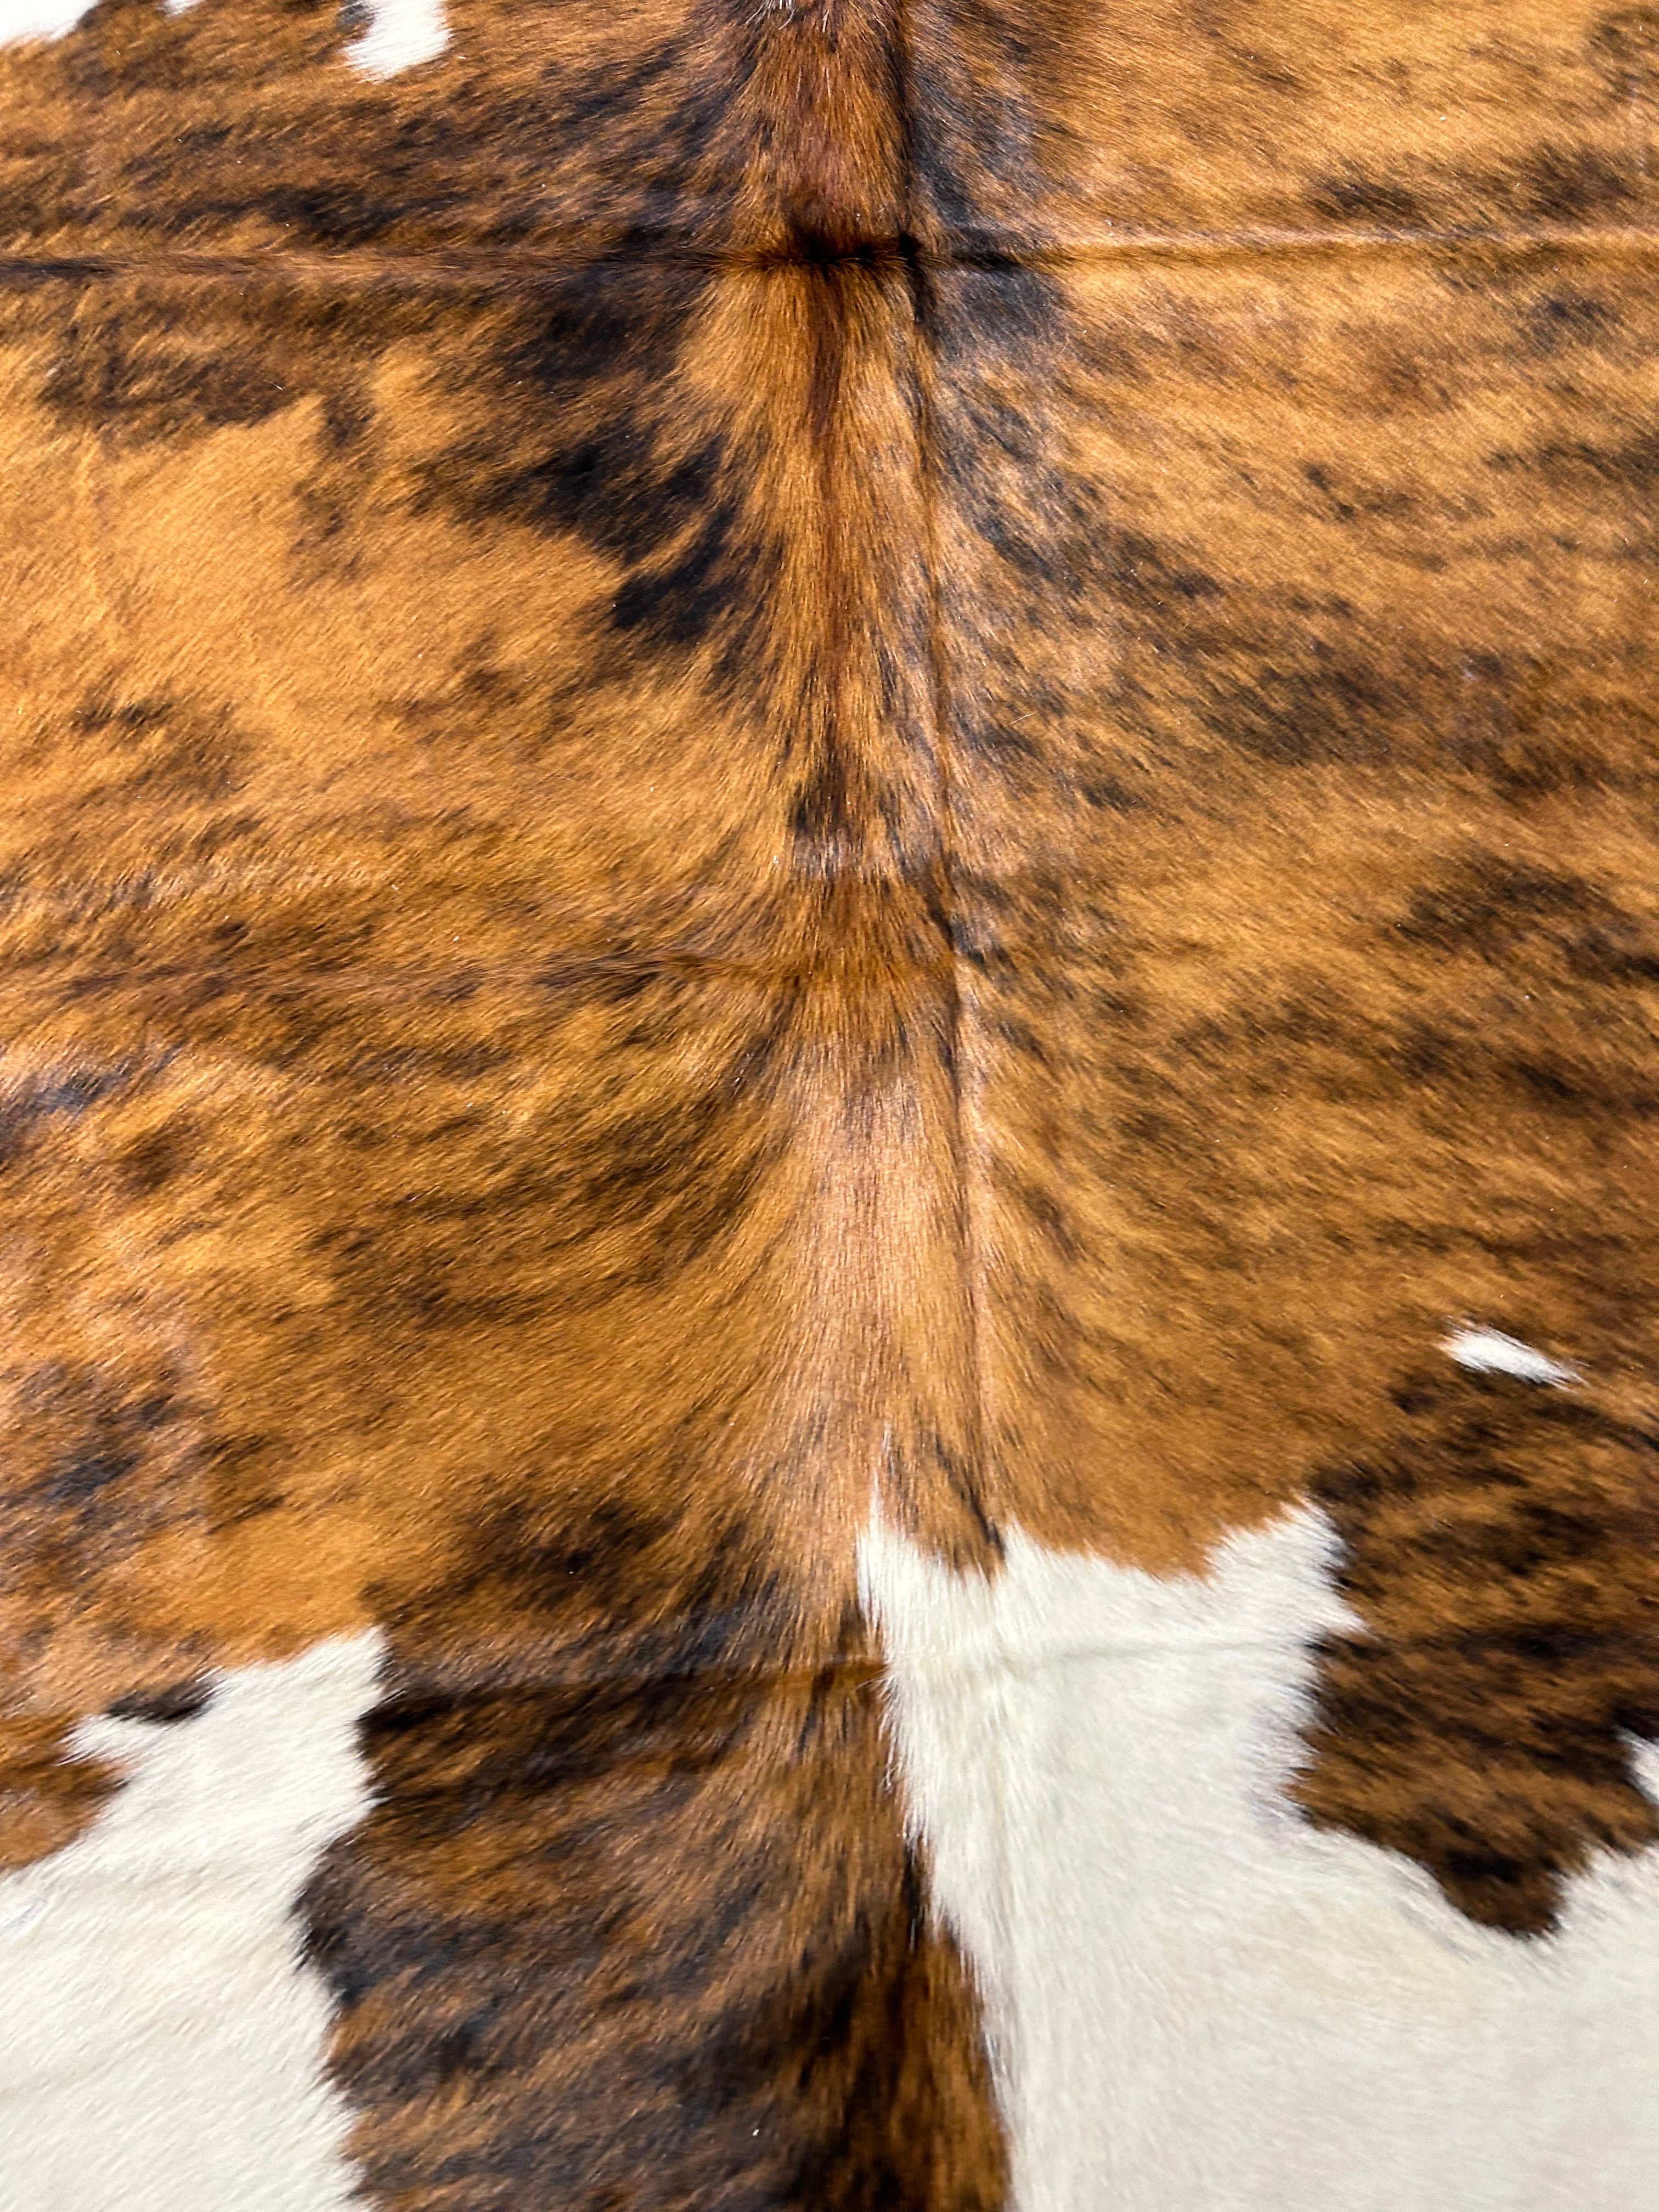 Tricolor Cowhide Rug (brown tones are predominant) Size: 8x6.2 feet D-010